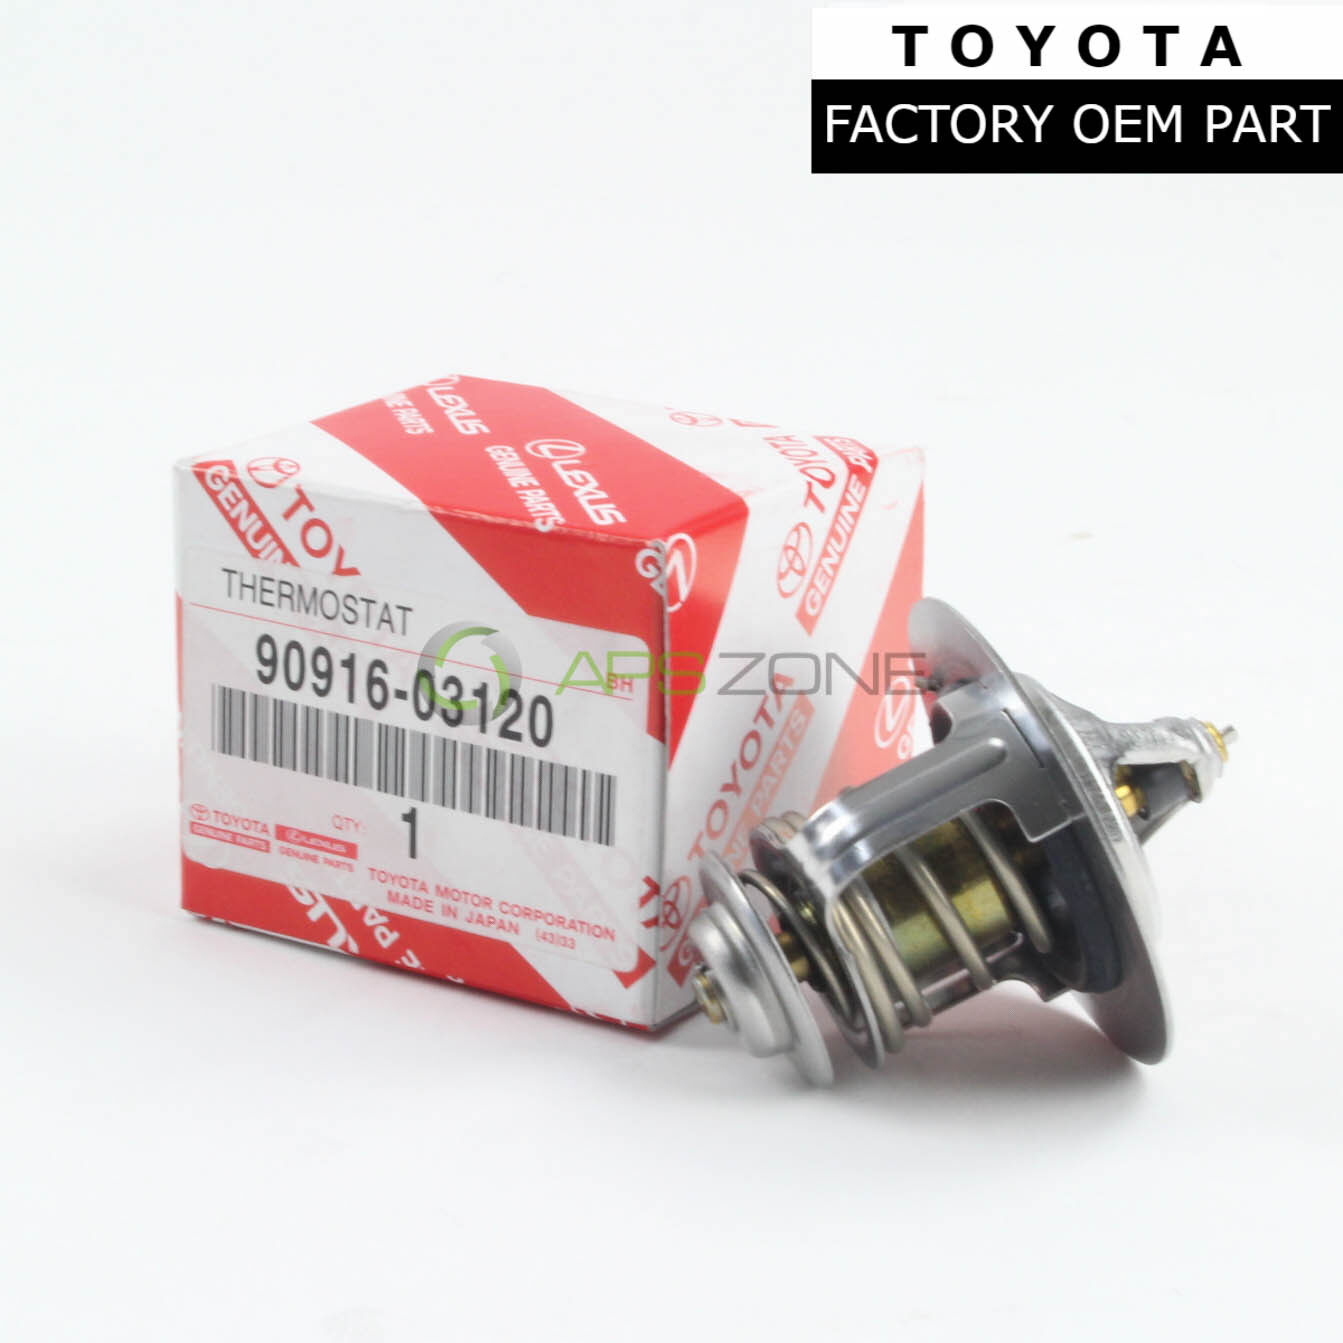 GENUINE TOYOTA TACOMA PREVIA T100 4RUNNER THERMOSTAT OEM 90916-03120